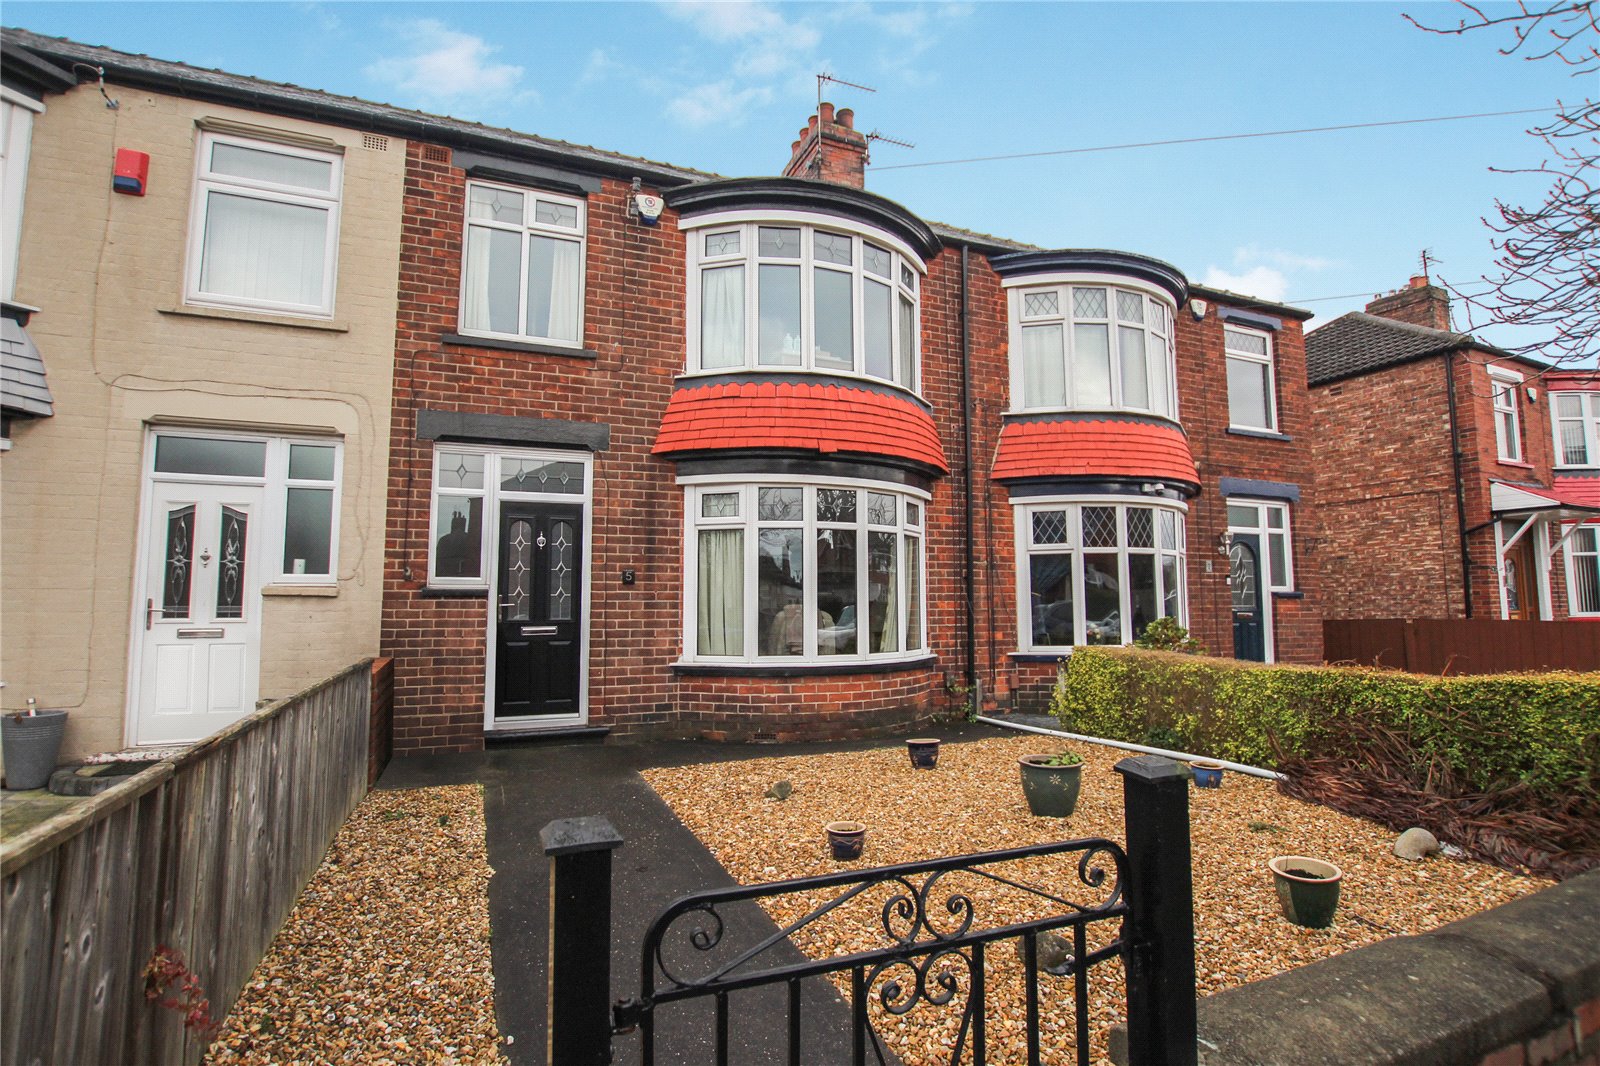 3 bed house for sale in Broadgate Road, Linthorpe 1